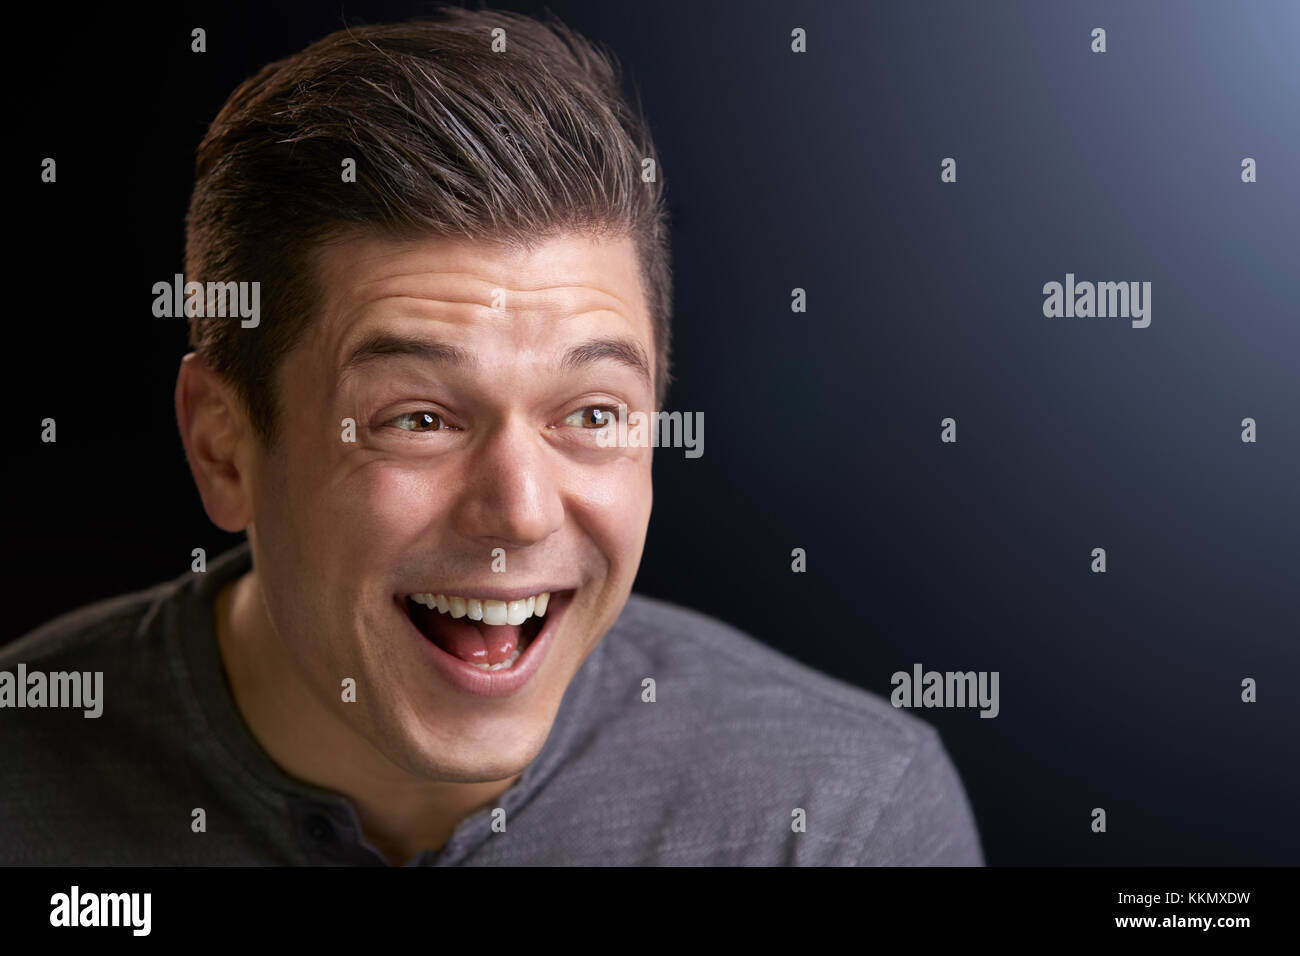 Portrait of a laughing young white man on black background Stock Photo